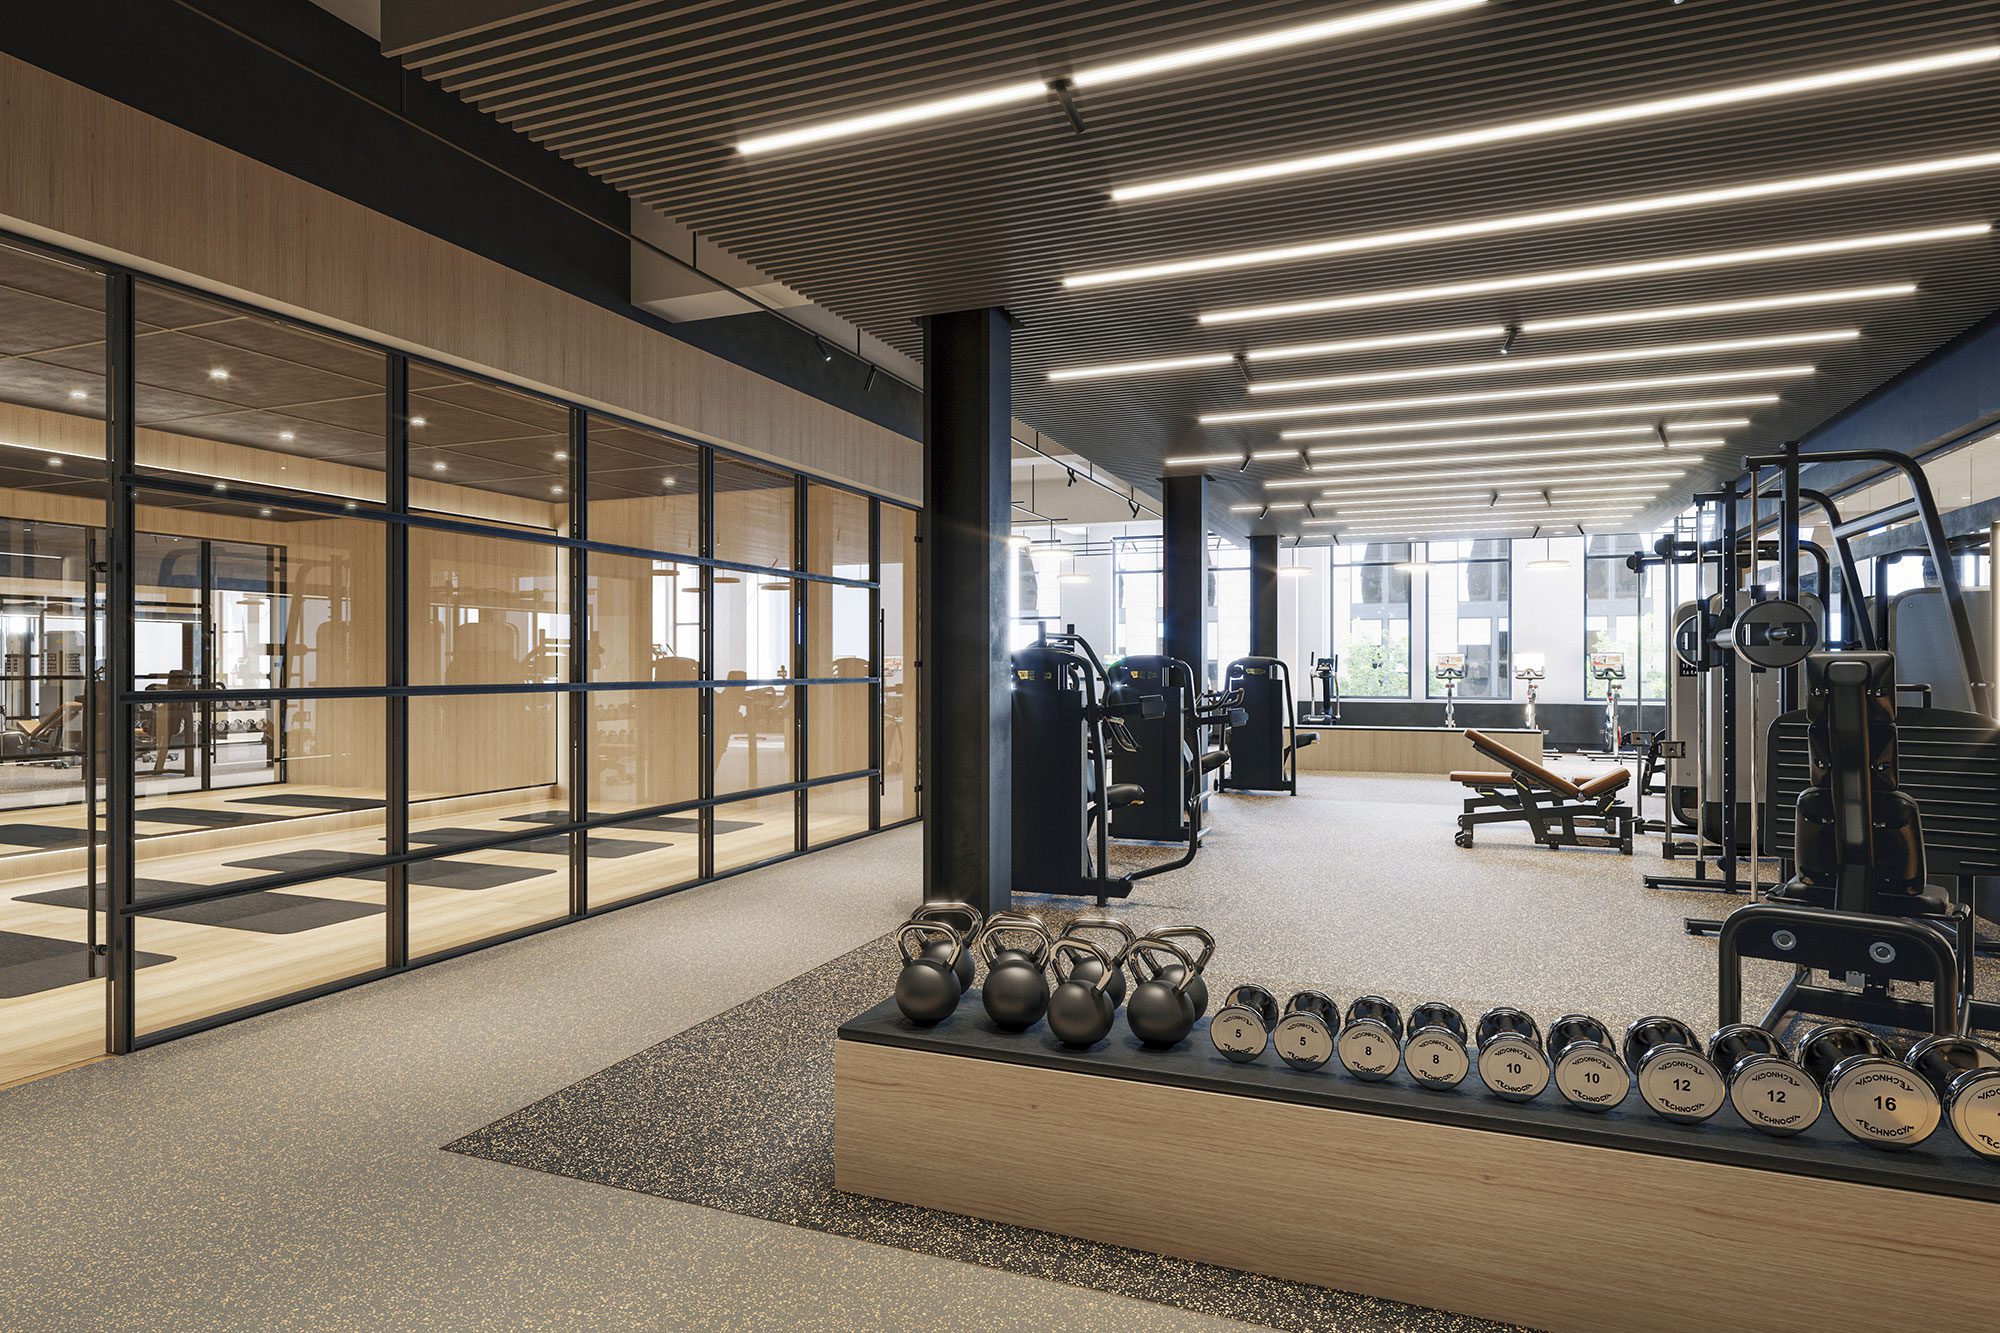 A full-sized gym with poly-laminate flooring and yoga studio